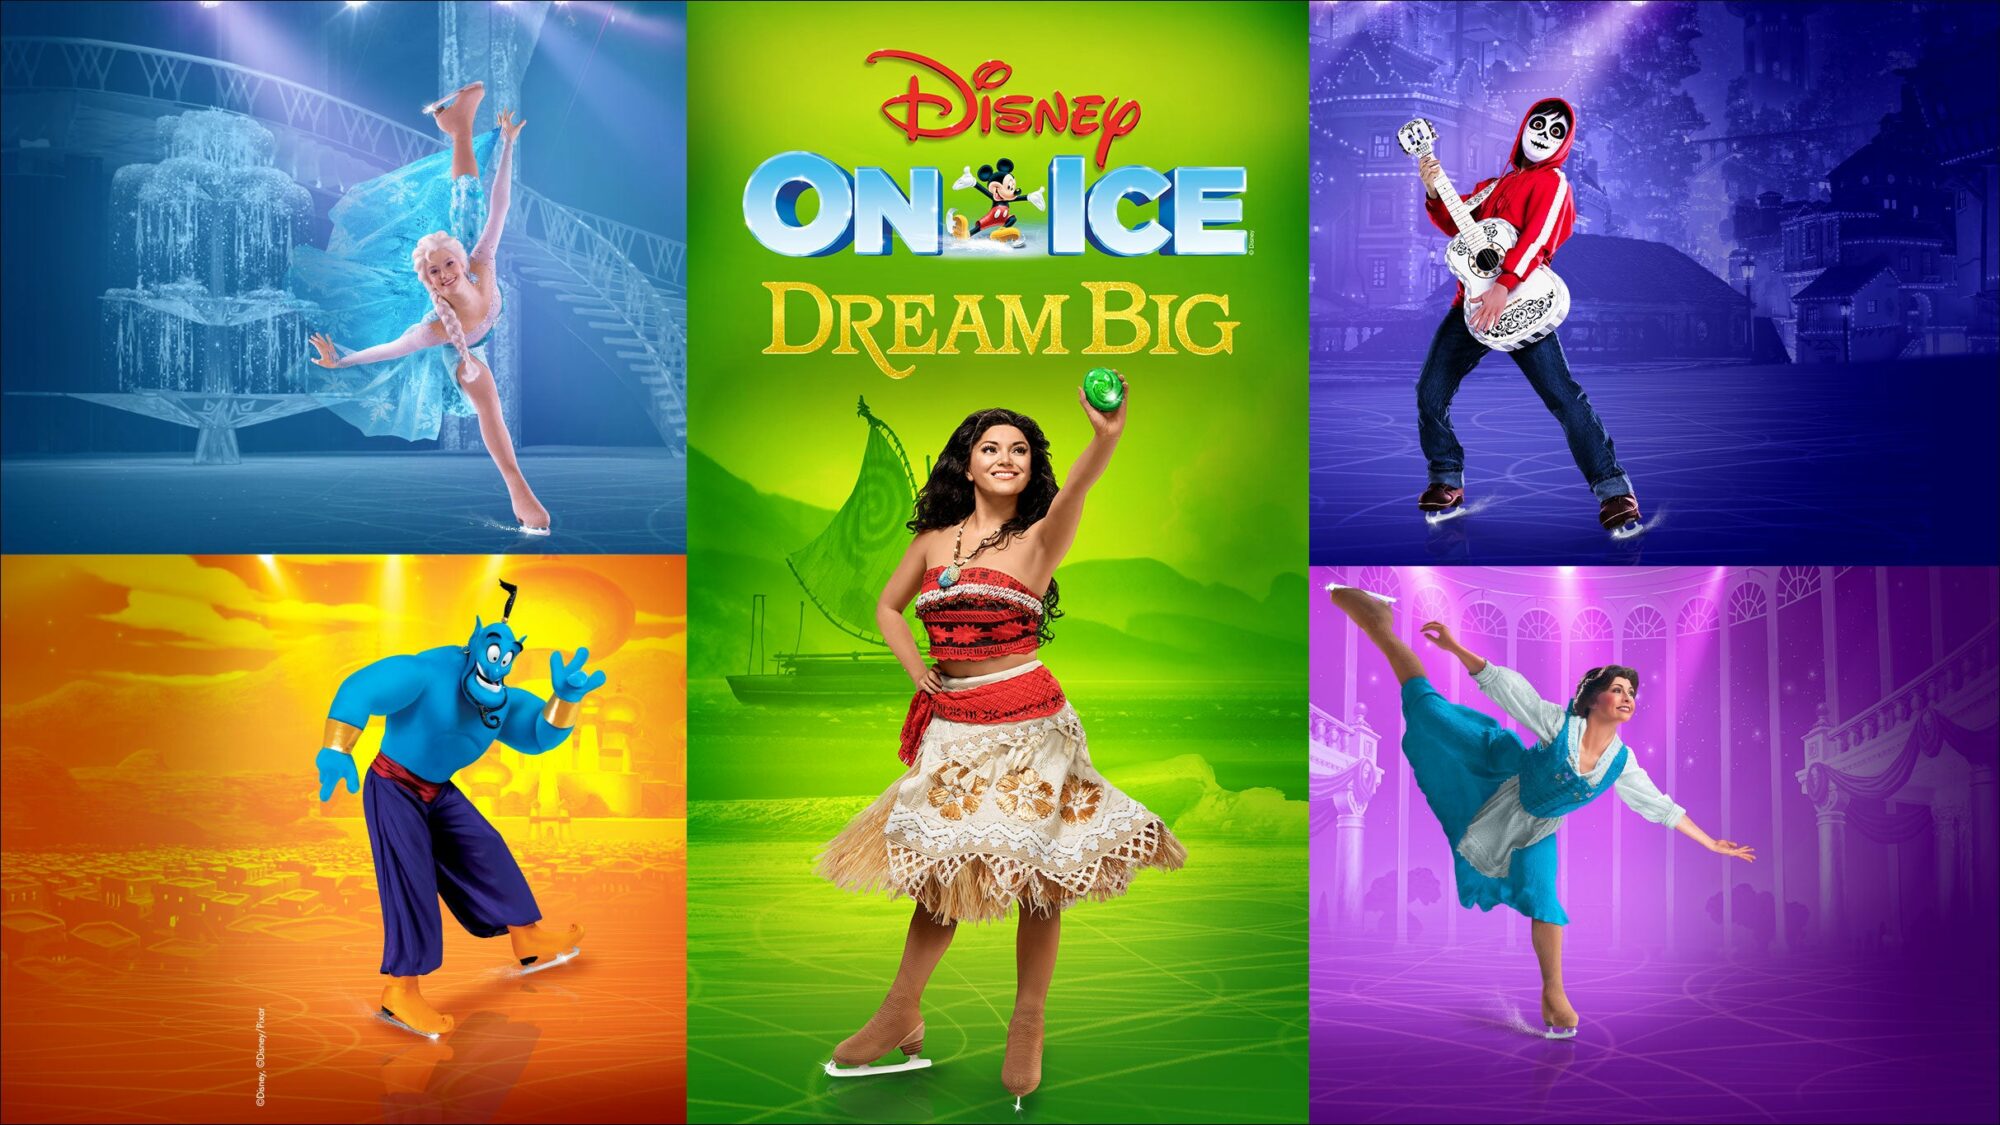 Image name Disney On Ice presents Dream Big at First Direct Arena Leeds the 1 image from the post Disney On Ice - Dream Big - Premium Package - the Gallery at First Direct Arena, Leeds in Yorkshire.com.